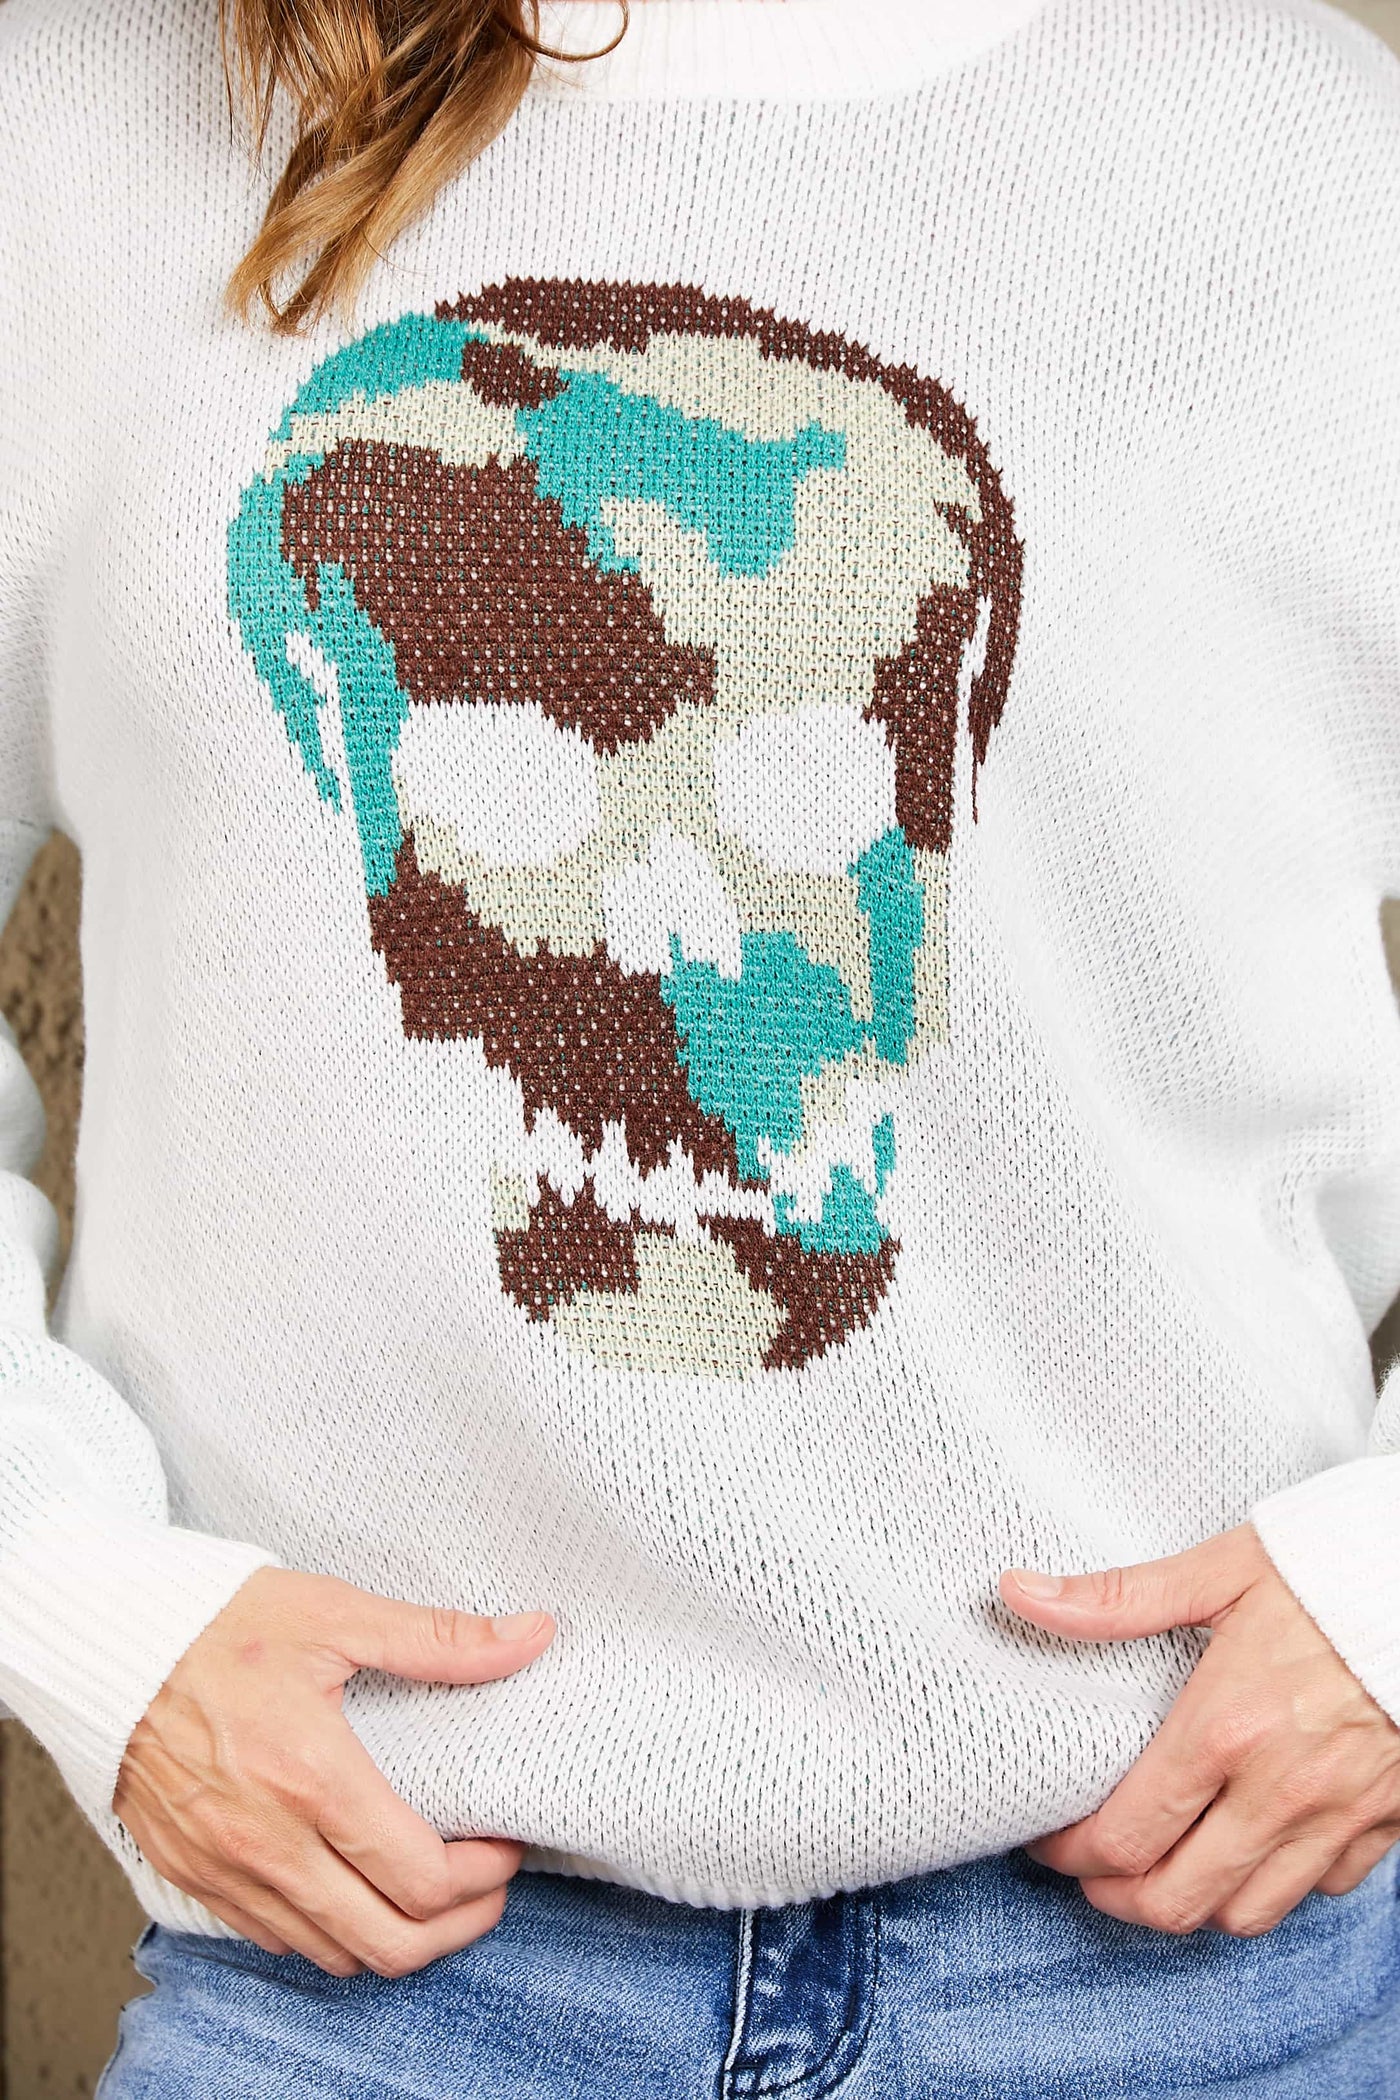 Woven Right Skull Graphic Drop Shoulder Sweater